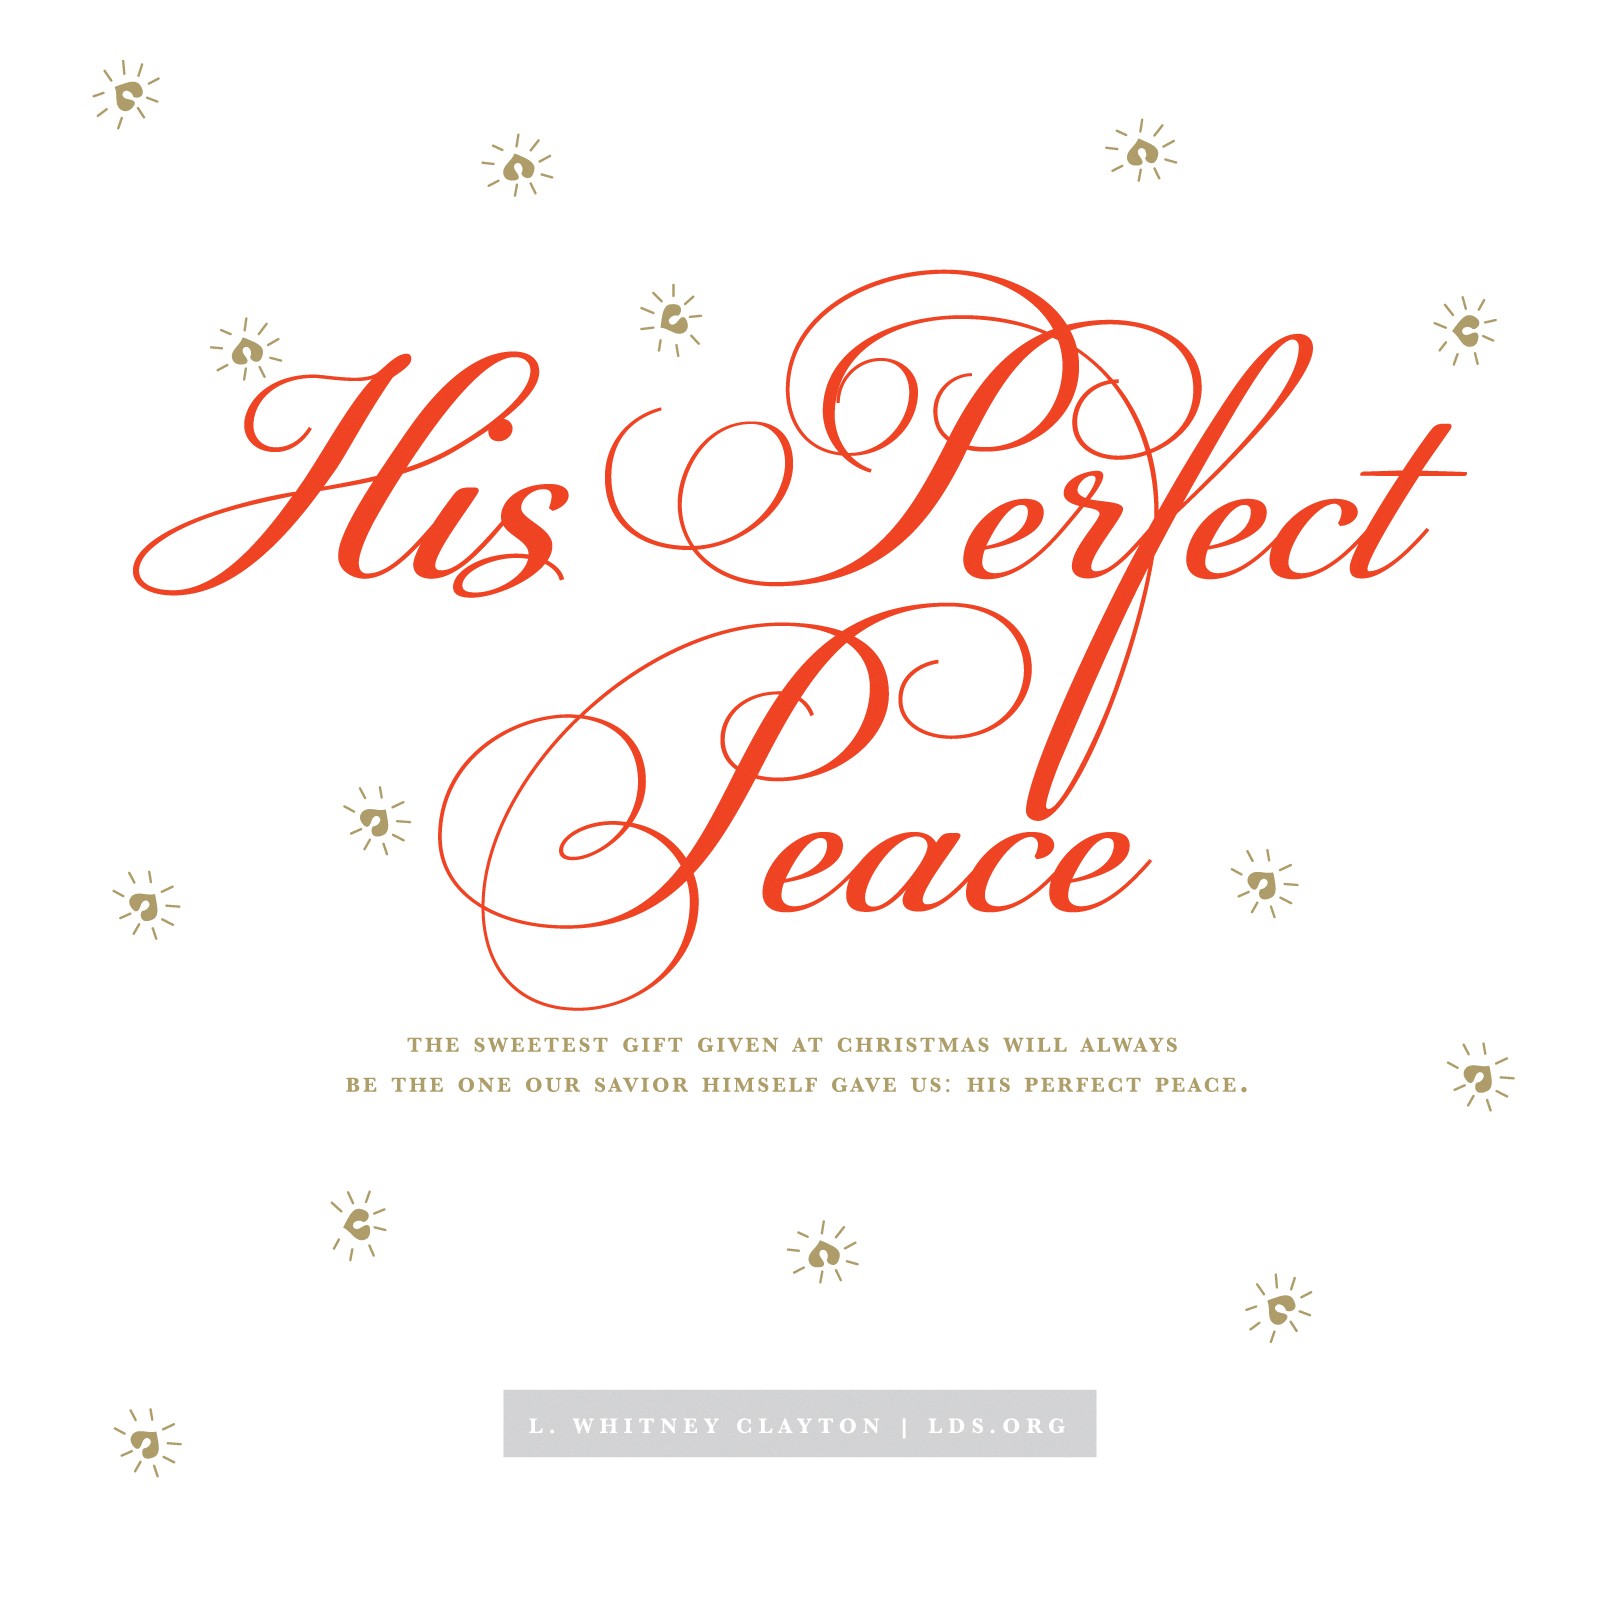 A white background with small gold hearts and a quote from Elder L. Whitney Clayton: “His perfect peace.”